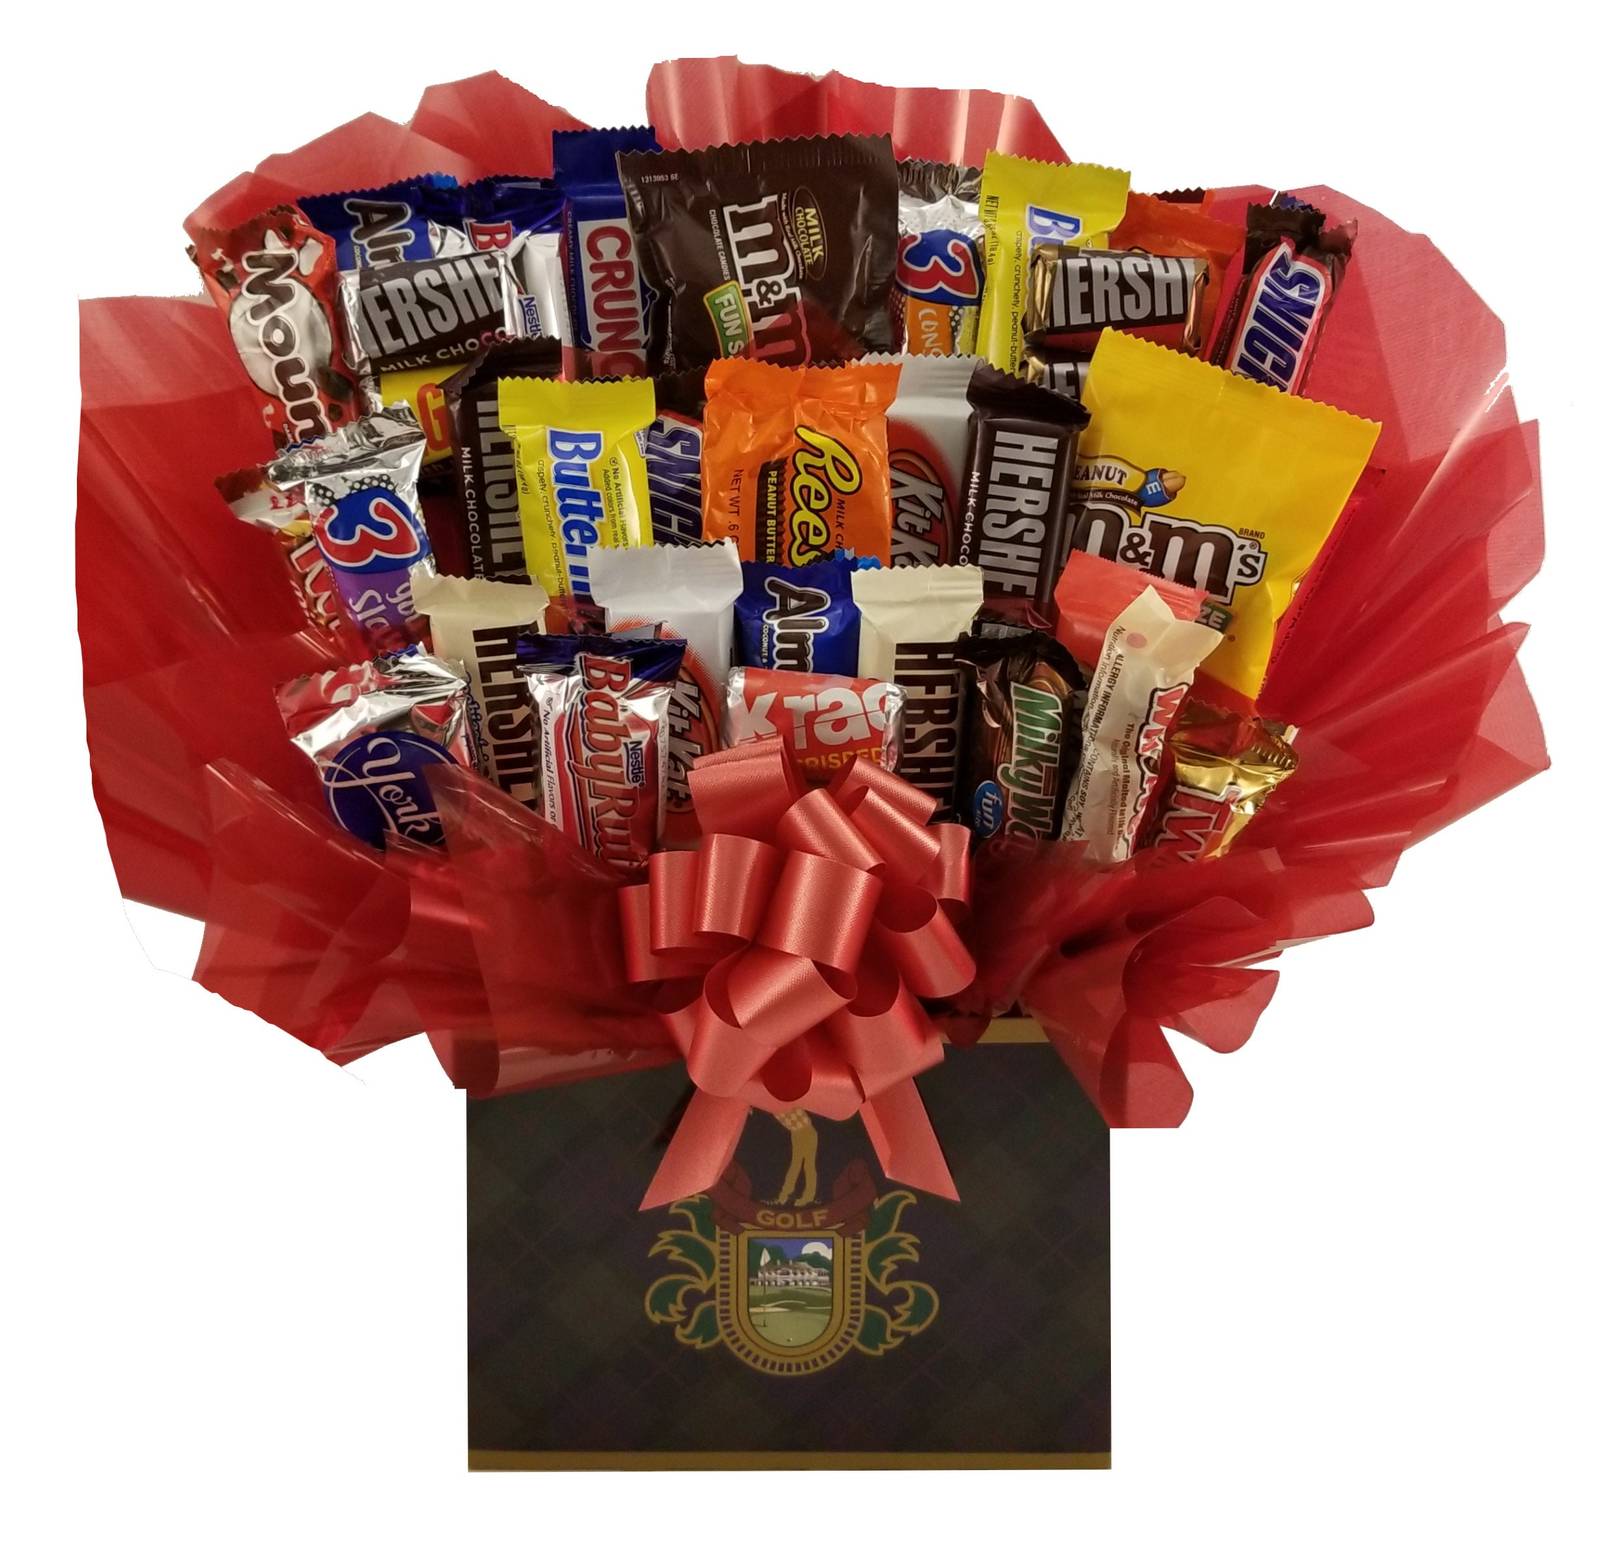 Primary image for Chocolate Candy bouquet (Golf Crest Gift Box)